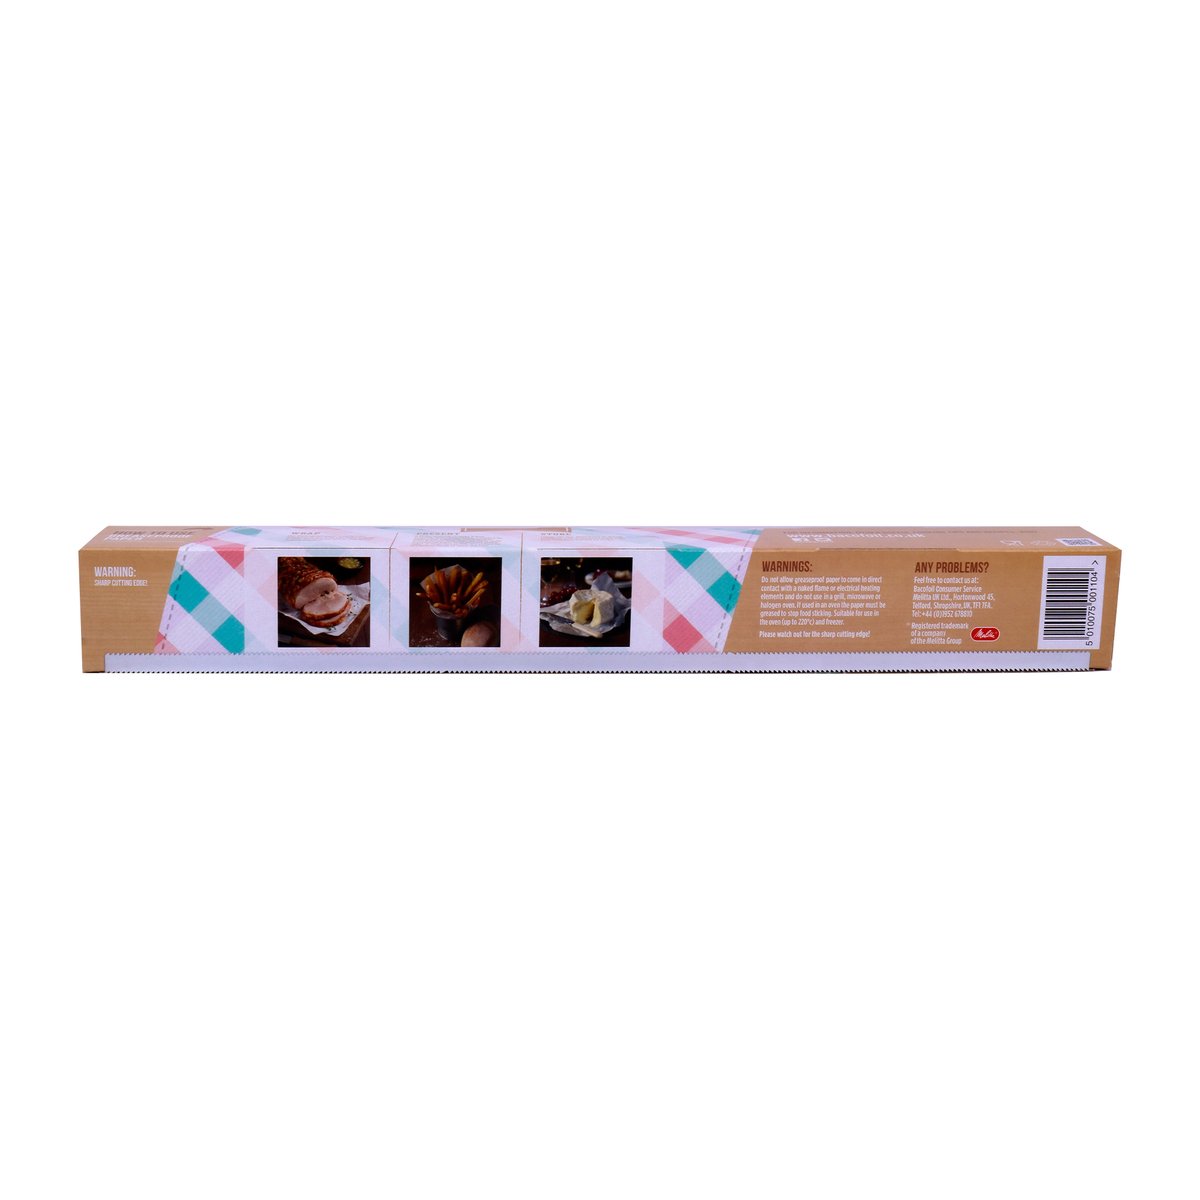 Bacofoil Greaseproof Paper 10m x 380mm 1pc